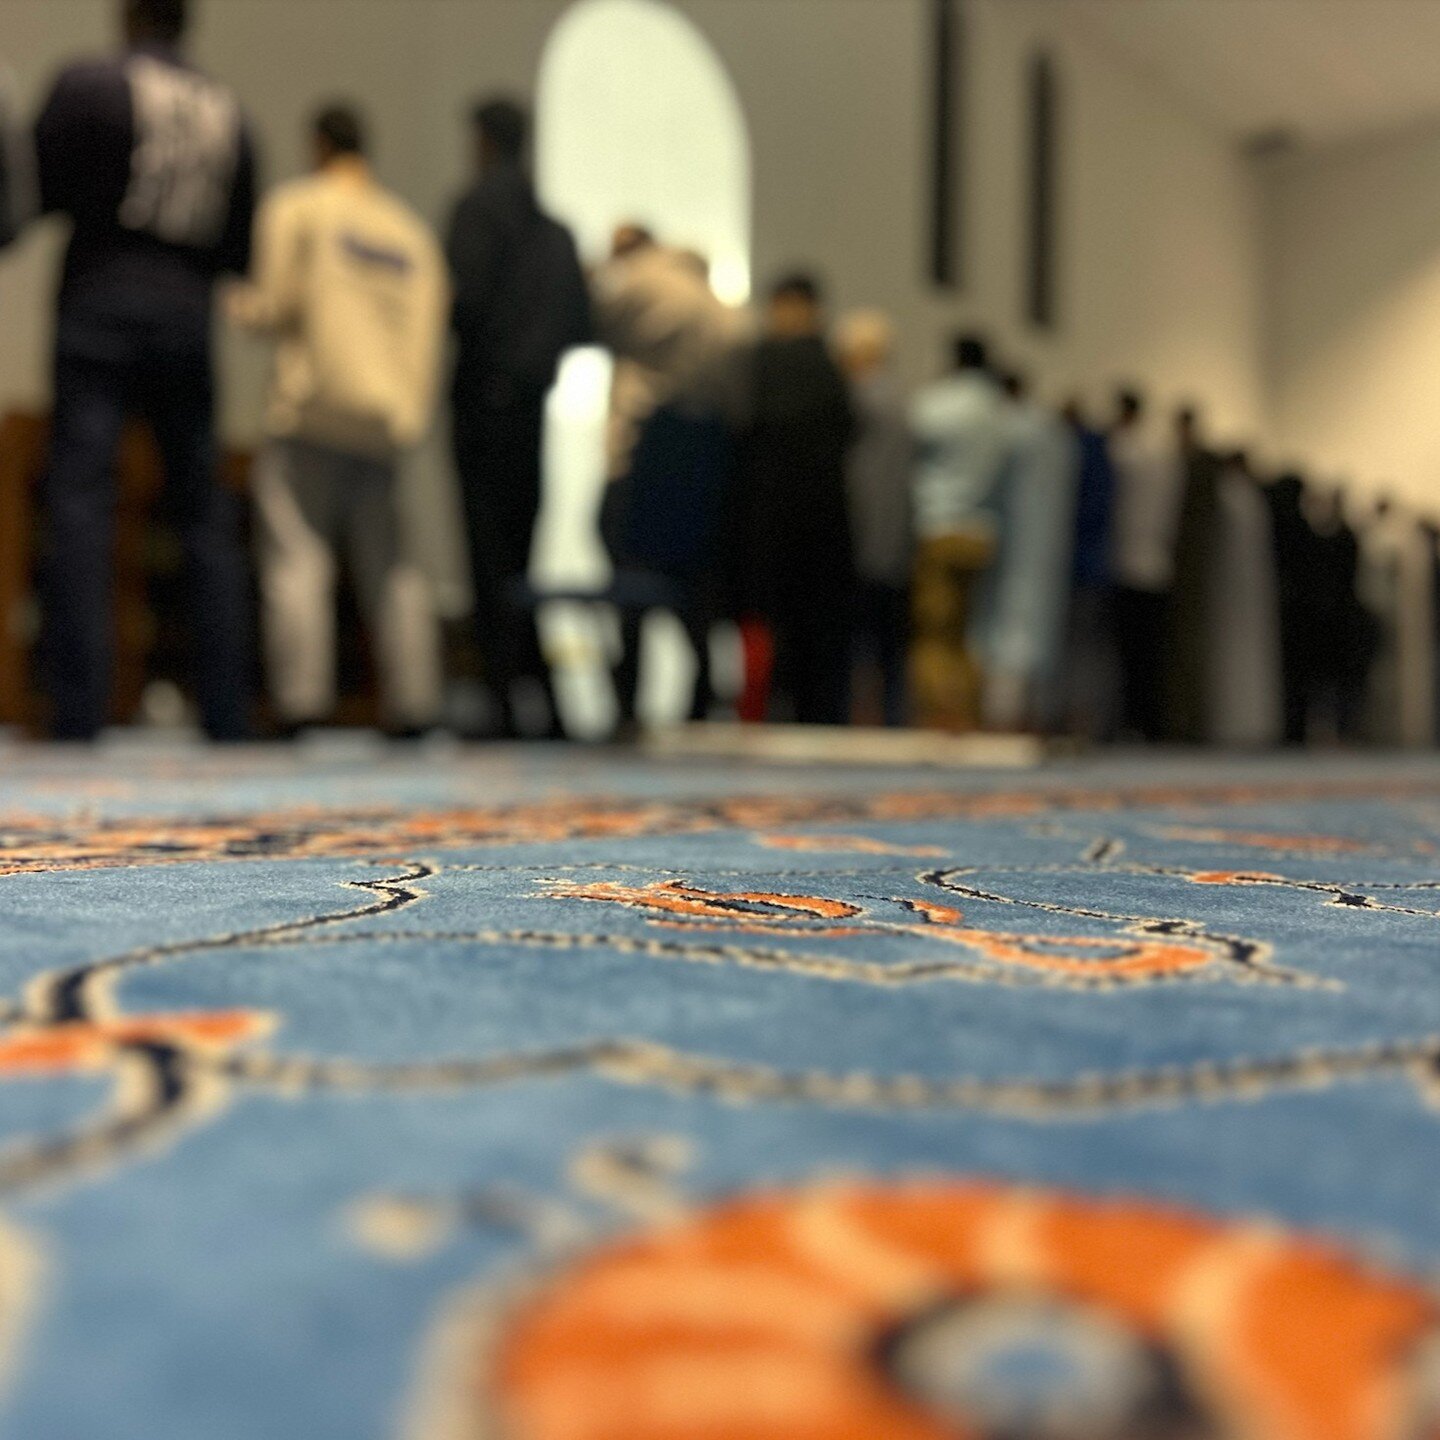 We hope that all of you have been able to make the most of what is left in these Last 10 Days. 

Just a reminder that we are hosting Tahajjud daily through the end of Ramadan, at 5 am. Make the most of what is left this year before all of us yearn fo